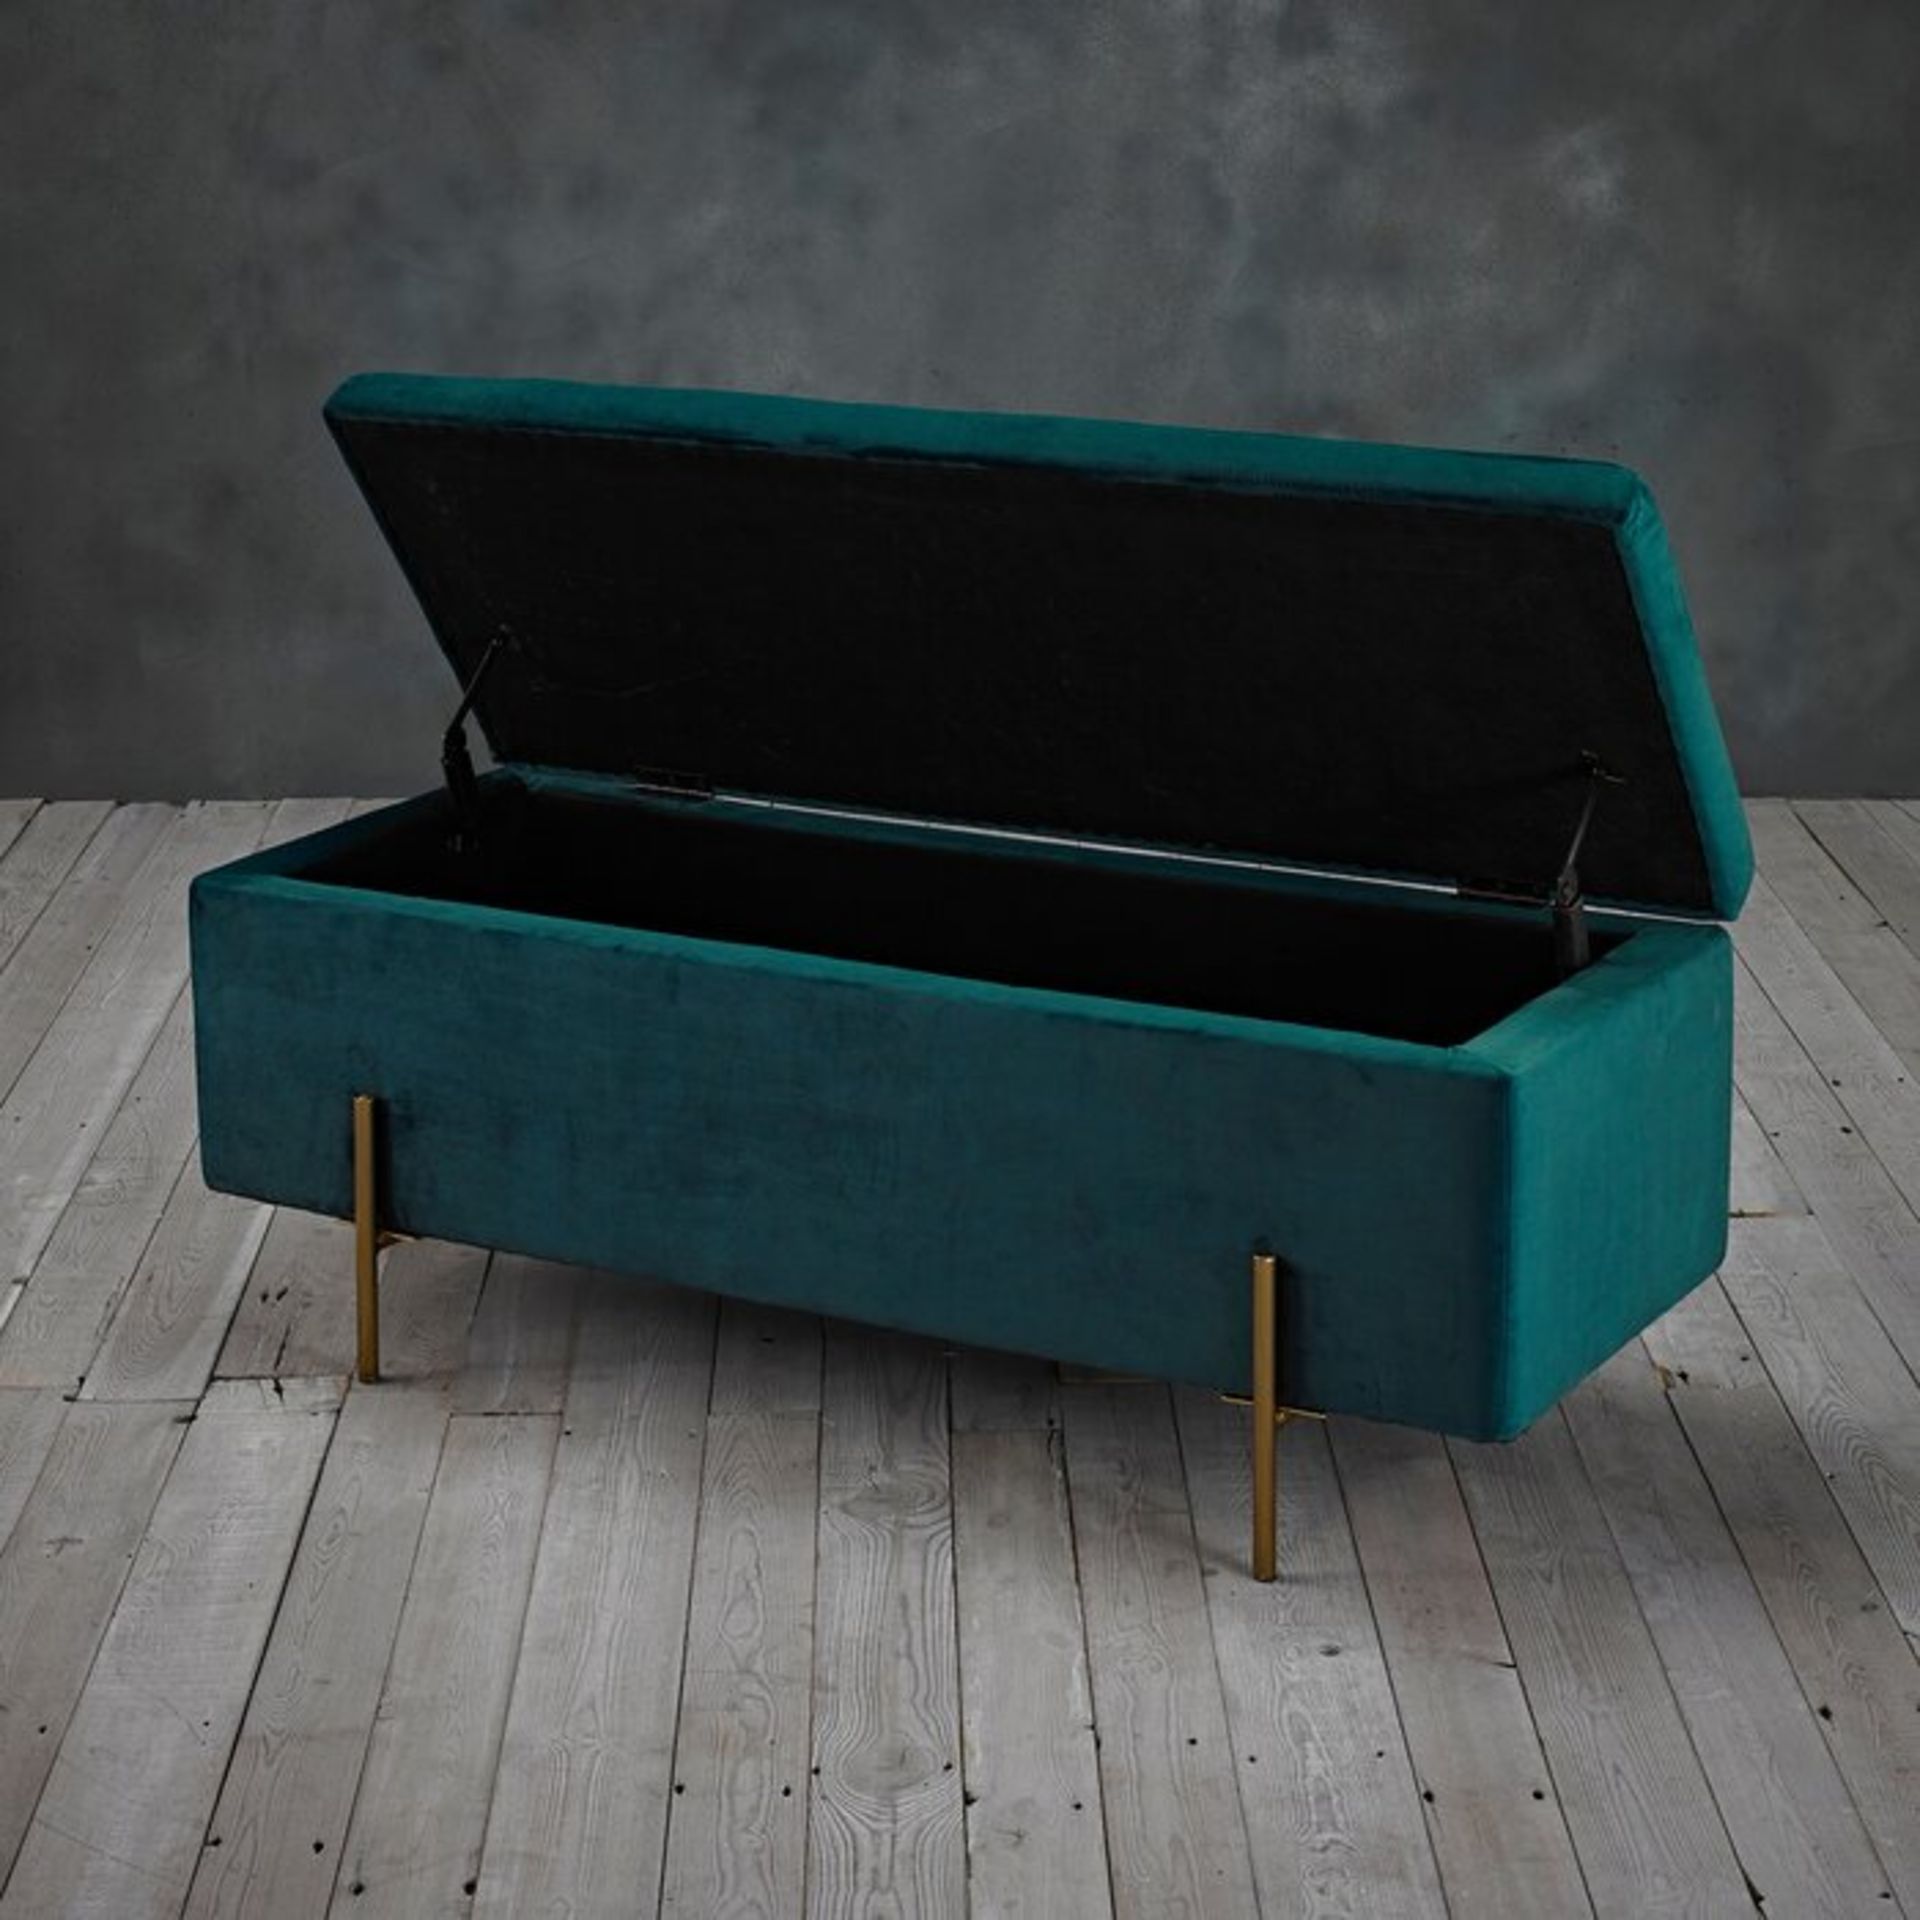 Colangelo Upholstered Storage Bench - RRP £126.99 - Image 2 of 2